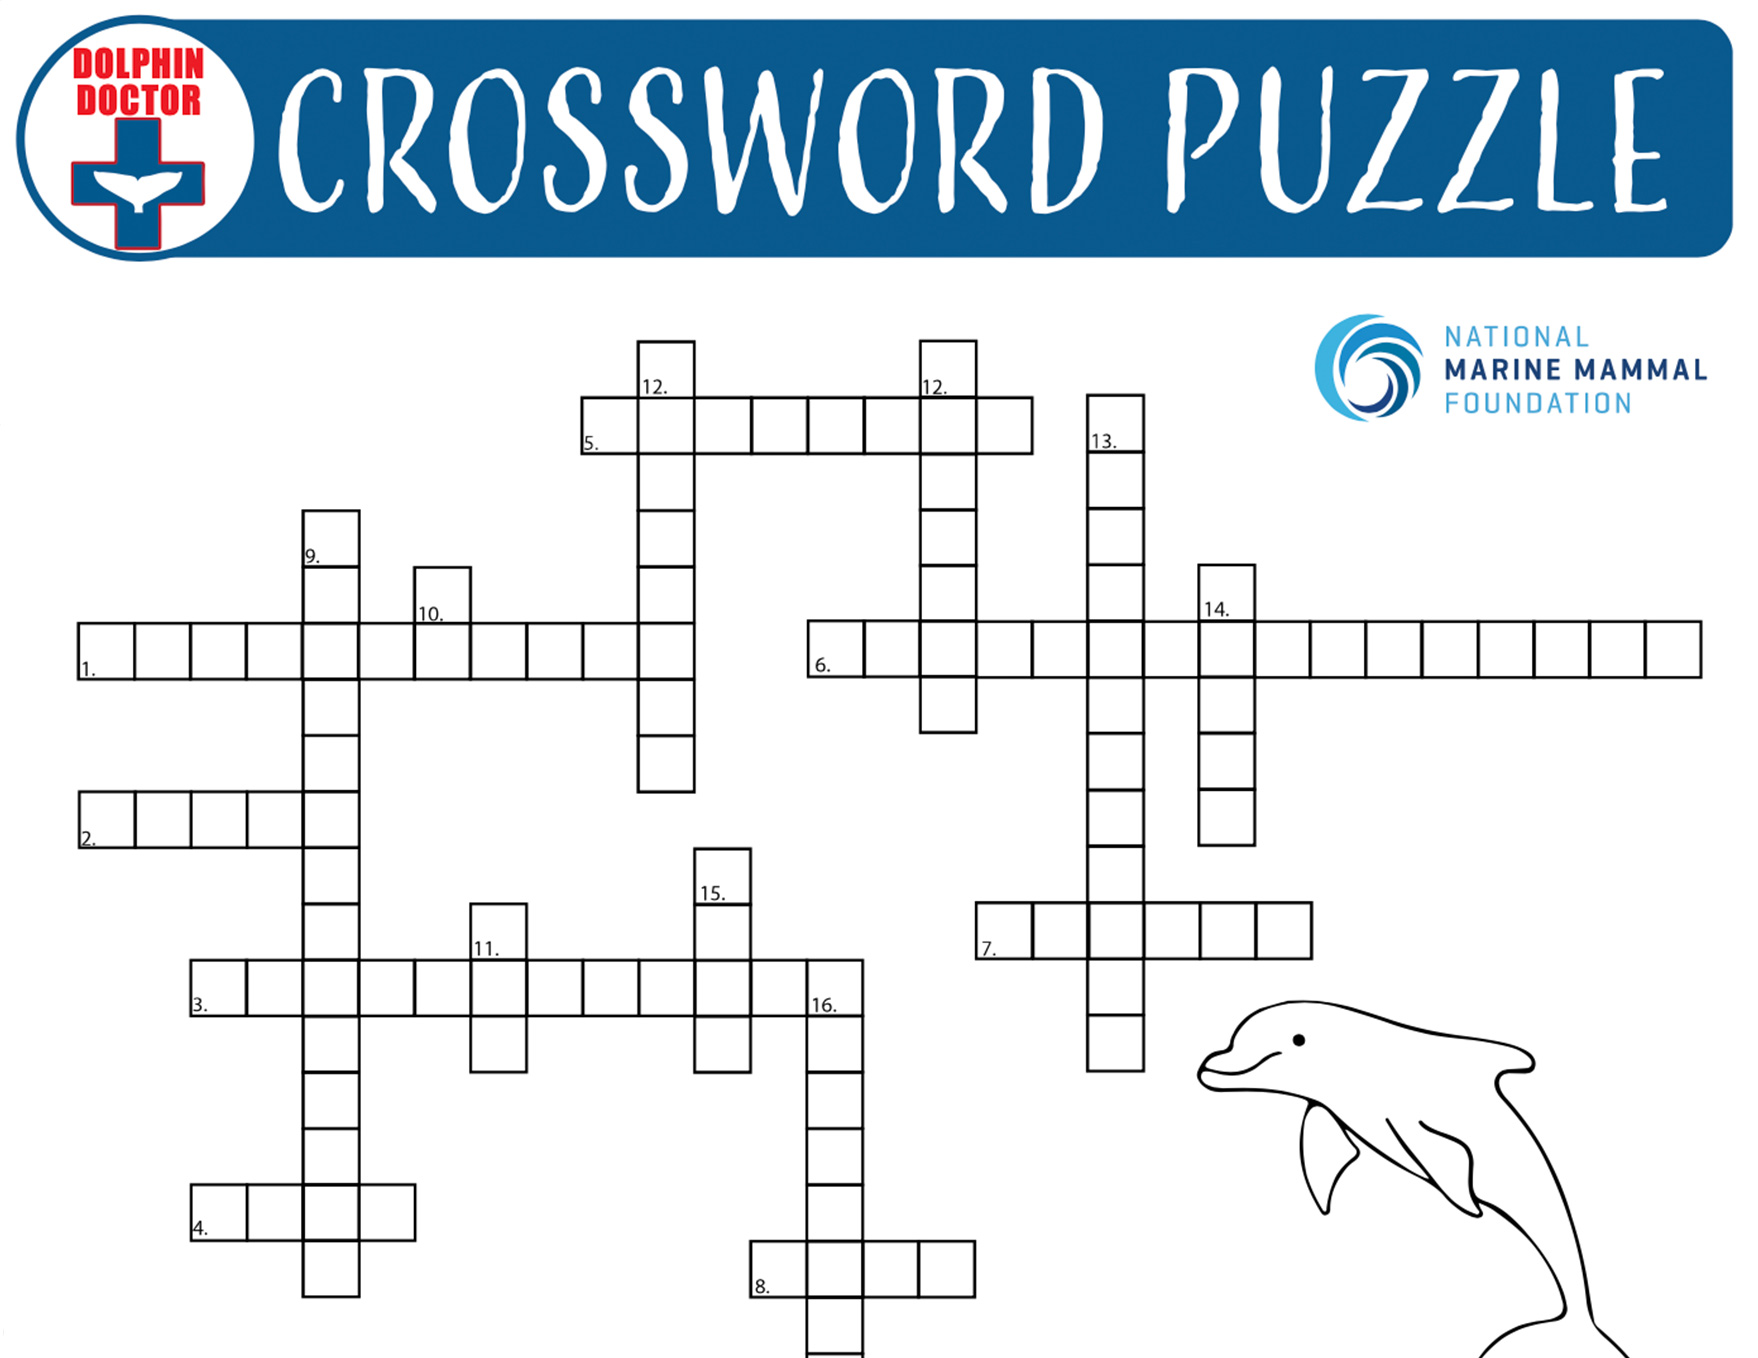 Use what you learned in the Dolphin Doctor workshop to complete the crossword puzzle